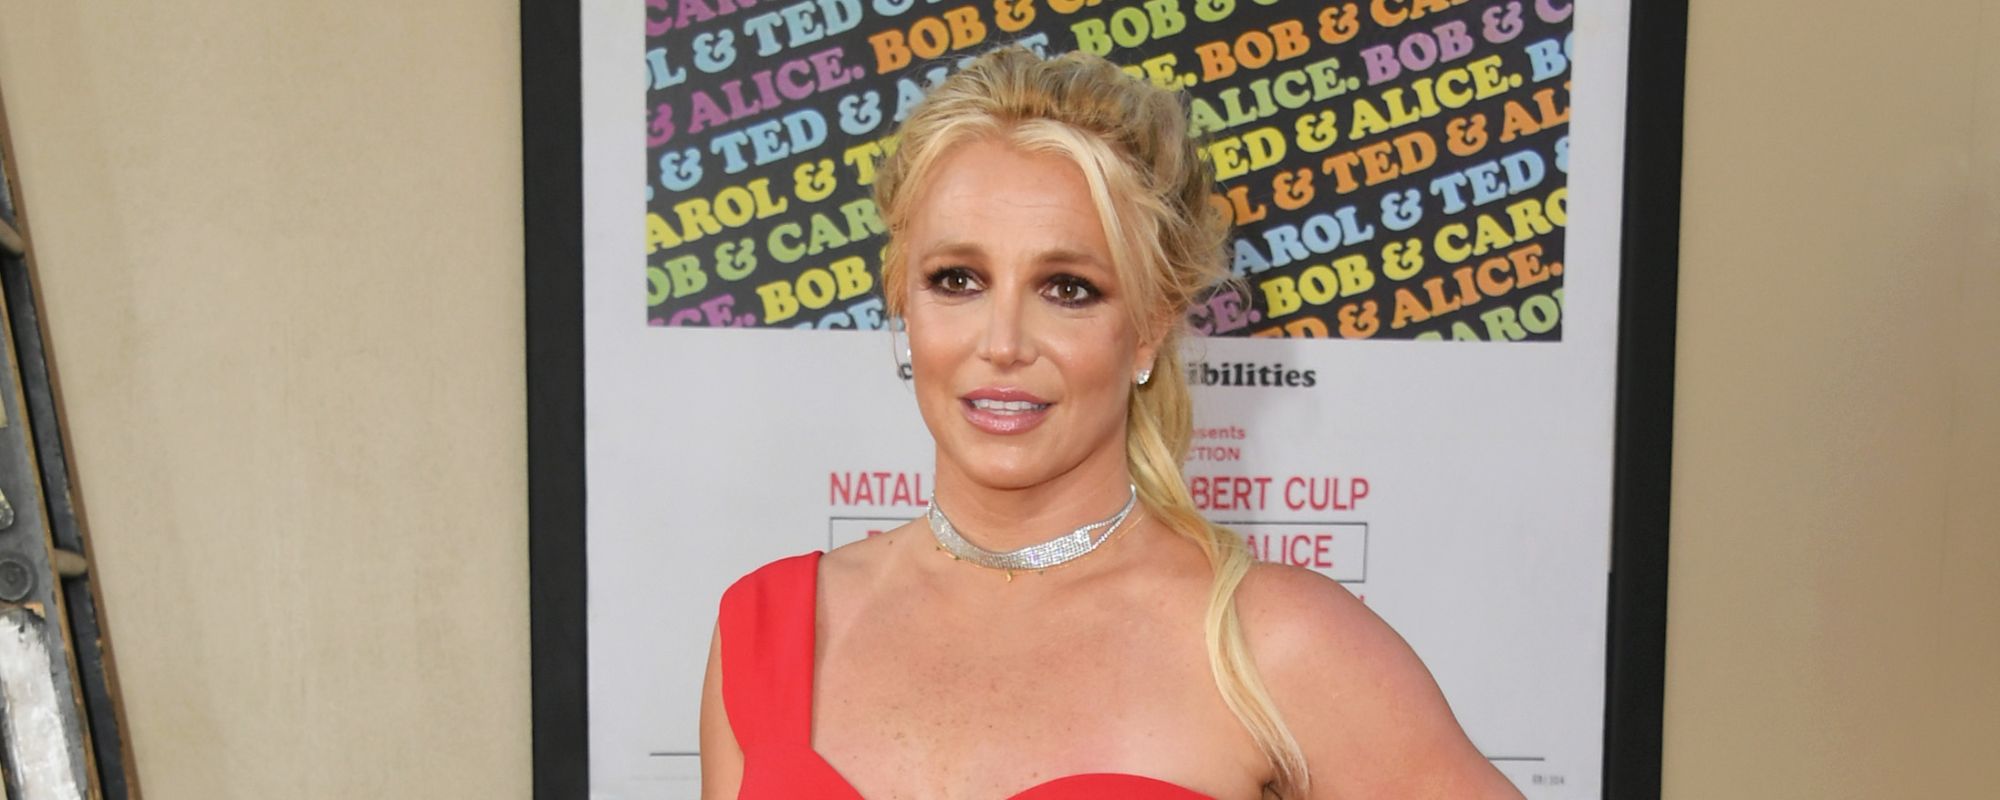 Britney Spears Claims She’s Changed Her Name, Fans Dreaming of New Music Under Alter Ego